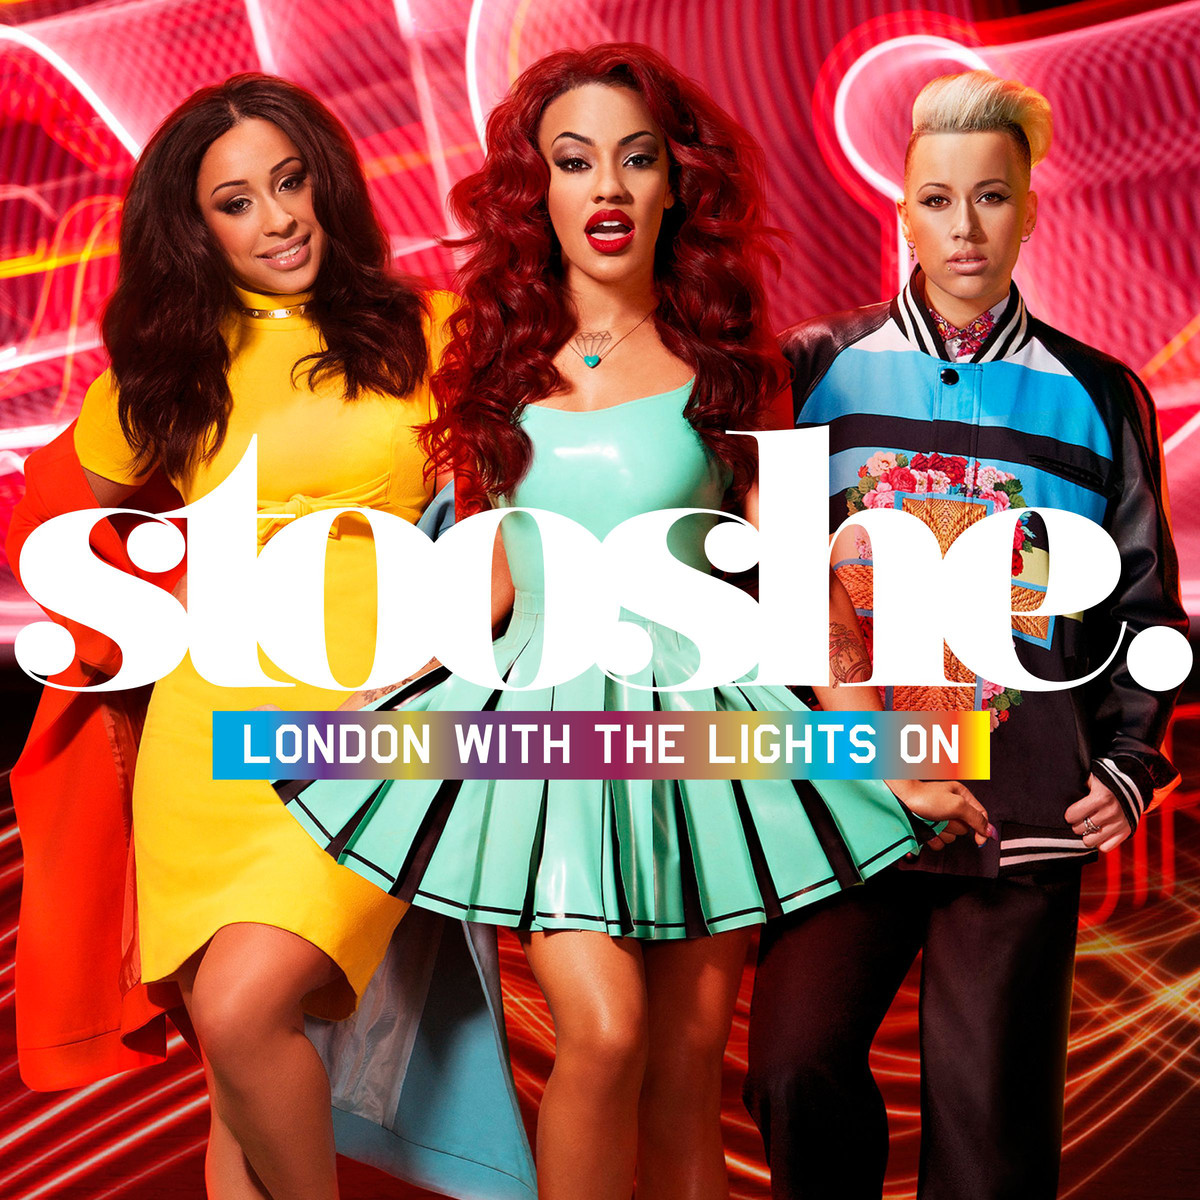 News Added Apr 30, 2013 “London with the Lights On” (previously named “Stooshe“) is the upcoming debut studio album by three-piece British R&B girl group Stooshe. It was originally set for release on 25 June 2012, later was held back to 26 November 2012. Finally, the album with the new name will be released on […]